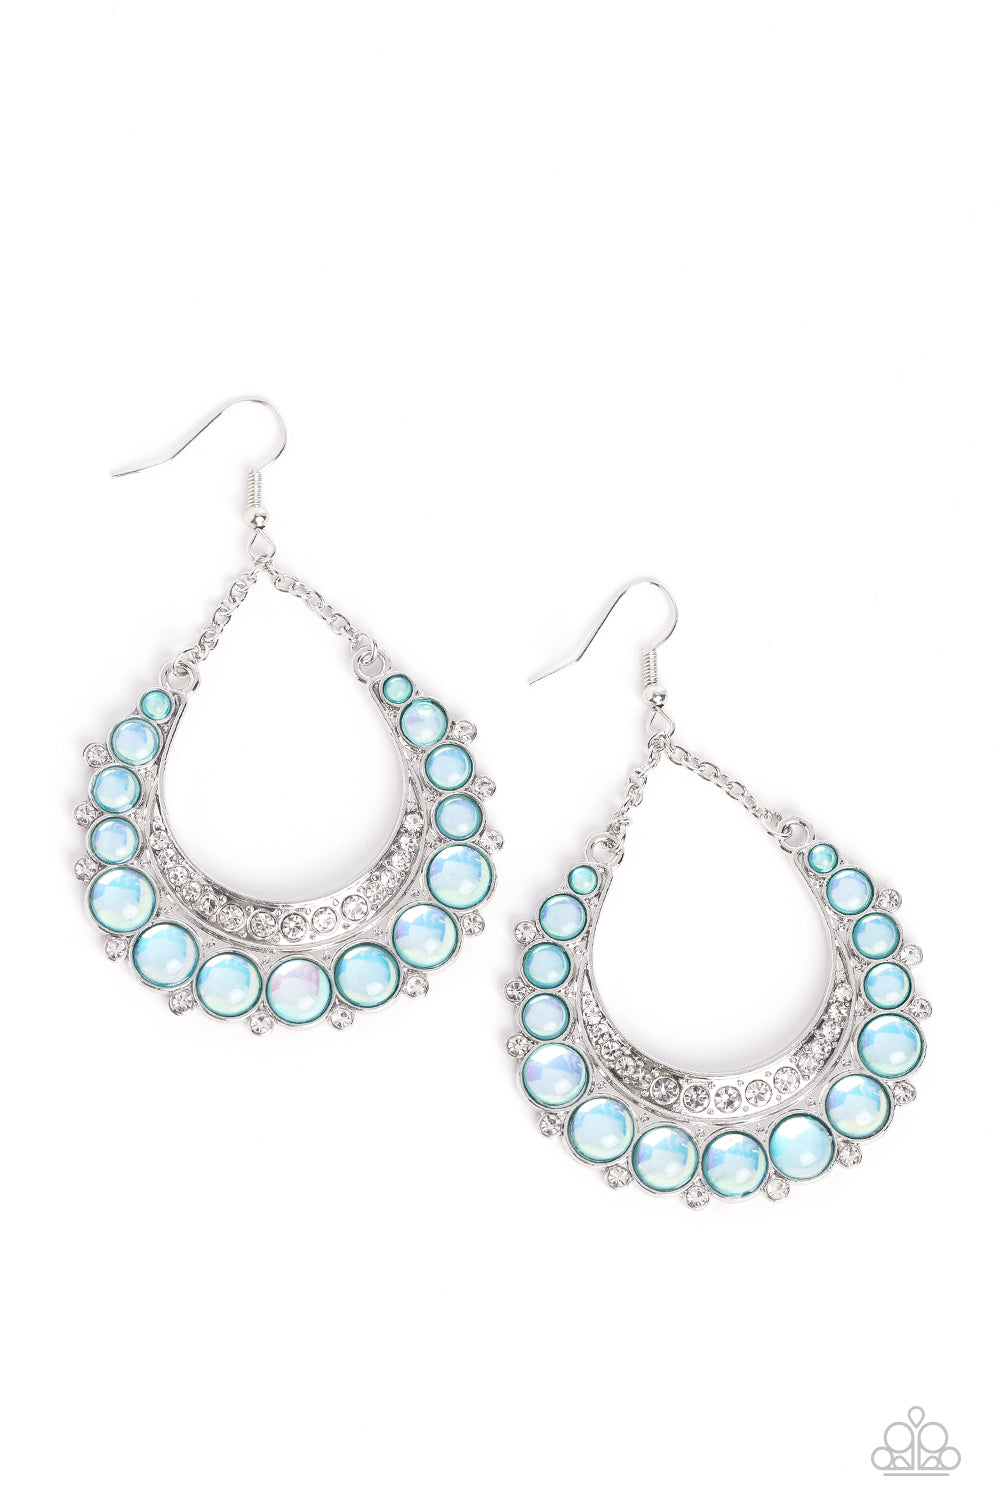 Bubbly Bling - Blue and Silver Earrings - Paparazzi Accessories - Bubbly blue beads are wrapped in silver frames as they fan out into a dramatic horseshoe shape. A thick silver crescent lined with white rhinestones nestles along the inside of the curve at the bottom, as tiny white rhinestones peek out from below the glassy blue beads. The dramatic design is suspended from silver chains, allowing the fancy framework to sway freely.